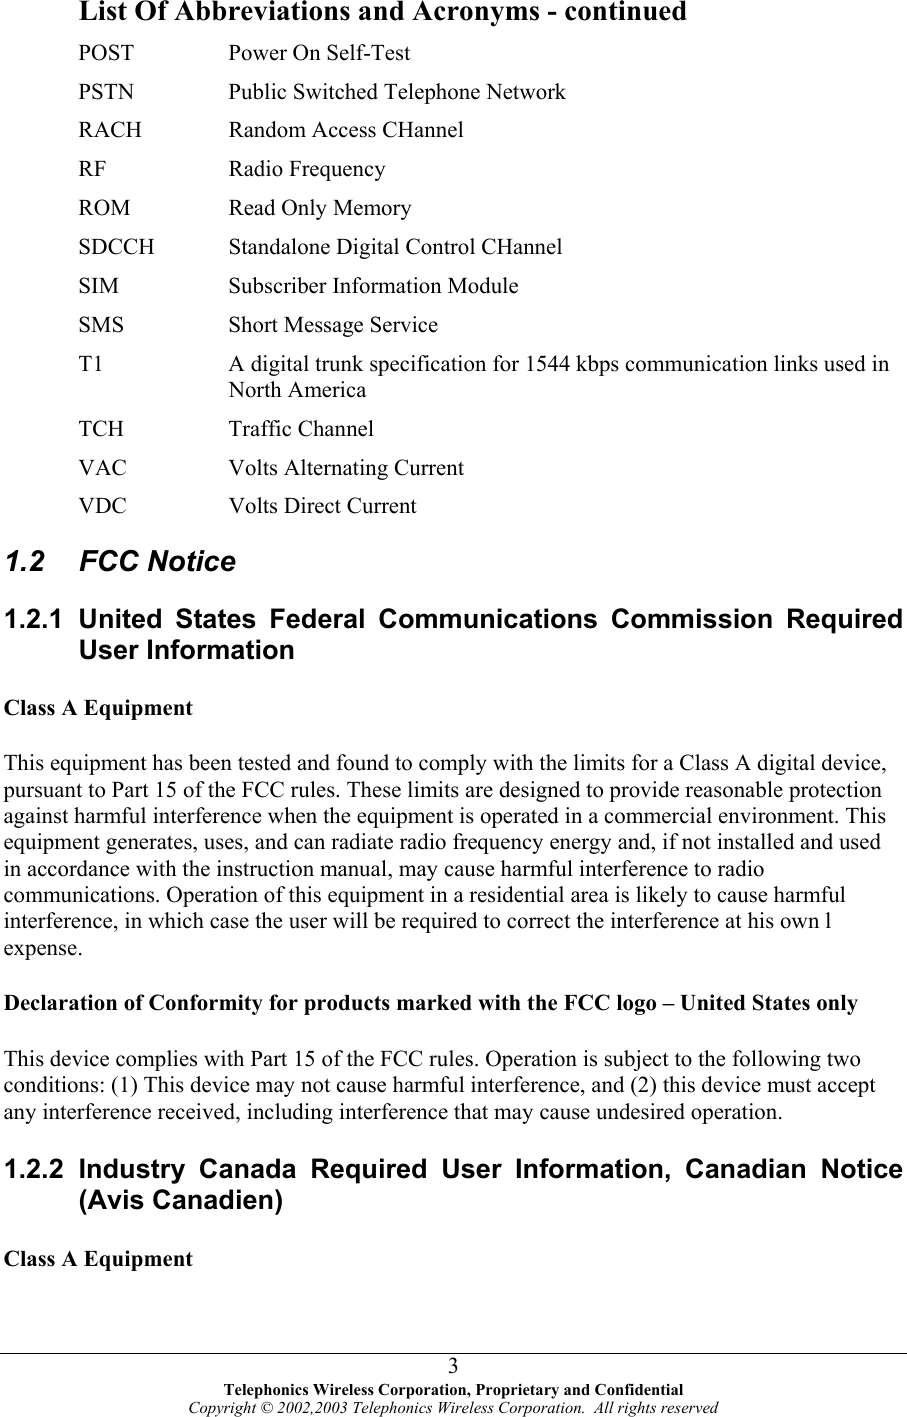  List Of Abbreviations and Acronyms - continued POST  Power On Self-Test PSTN  Public Switched Telephone Network RACH  Random Access CHannel RF Radio Frequency ROM  Read Only Memory SDCCH       Standalone Digital Control CHannel SIM  Subscriber Information Module SMS  Short Message Service T1  A digital trunk specification for 1544 kbps communication links used in North America TCH Traffic Channel VAC  Volts Alternating Current VDC Volts Direct Current 1.2 FCC Notice 1.2.1 United States Federal Communications Commission Required User Information Class A Equipment This equipment has been tested and found to comply with the limits for a Class A digital device, pursuant to Part 15 of the FCC rules. These limits are designed to provide reasonable protection against harmful interference when the equipment is operated in a commercial environment. This equipment generates, uses, and can radiate radio frequency energy and, if not installed and used in accordance with the instruction manual, may cause harmful interference to radio communications. Operation of this equipment in a residential area is likely to cause harmful interference, in which case the user will be required to correct the interference at his own l expense. Declaration of Conformity for products marked with the FCC logo – United States only This device complies with Part 15 of the FCC rules. Operation is subject to the following two conditions: (1) This device may not cause harmful interference, and (2) this device must accept any interference received, including interference that may cause undesired operation. 1.2.2 Industry Canada Required User Information, Canadian Notice (Avis Canadien) Class A Equipment  Telephonics Wireless Corporation, Proprietary and Confidential Copyright © 2002,2003 Telephonics Wireless Corporation.  All rights reserved 3